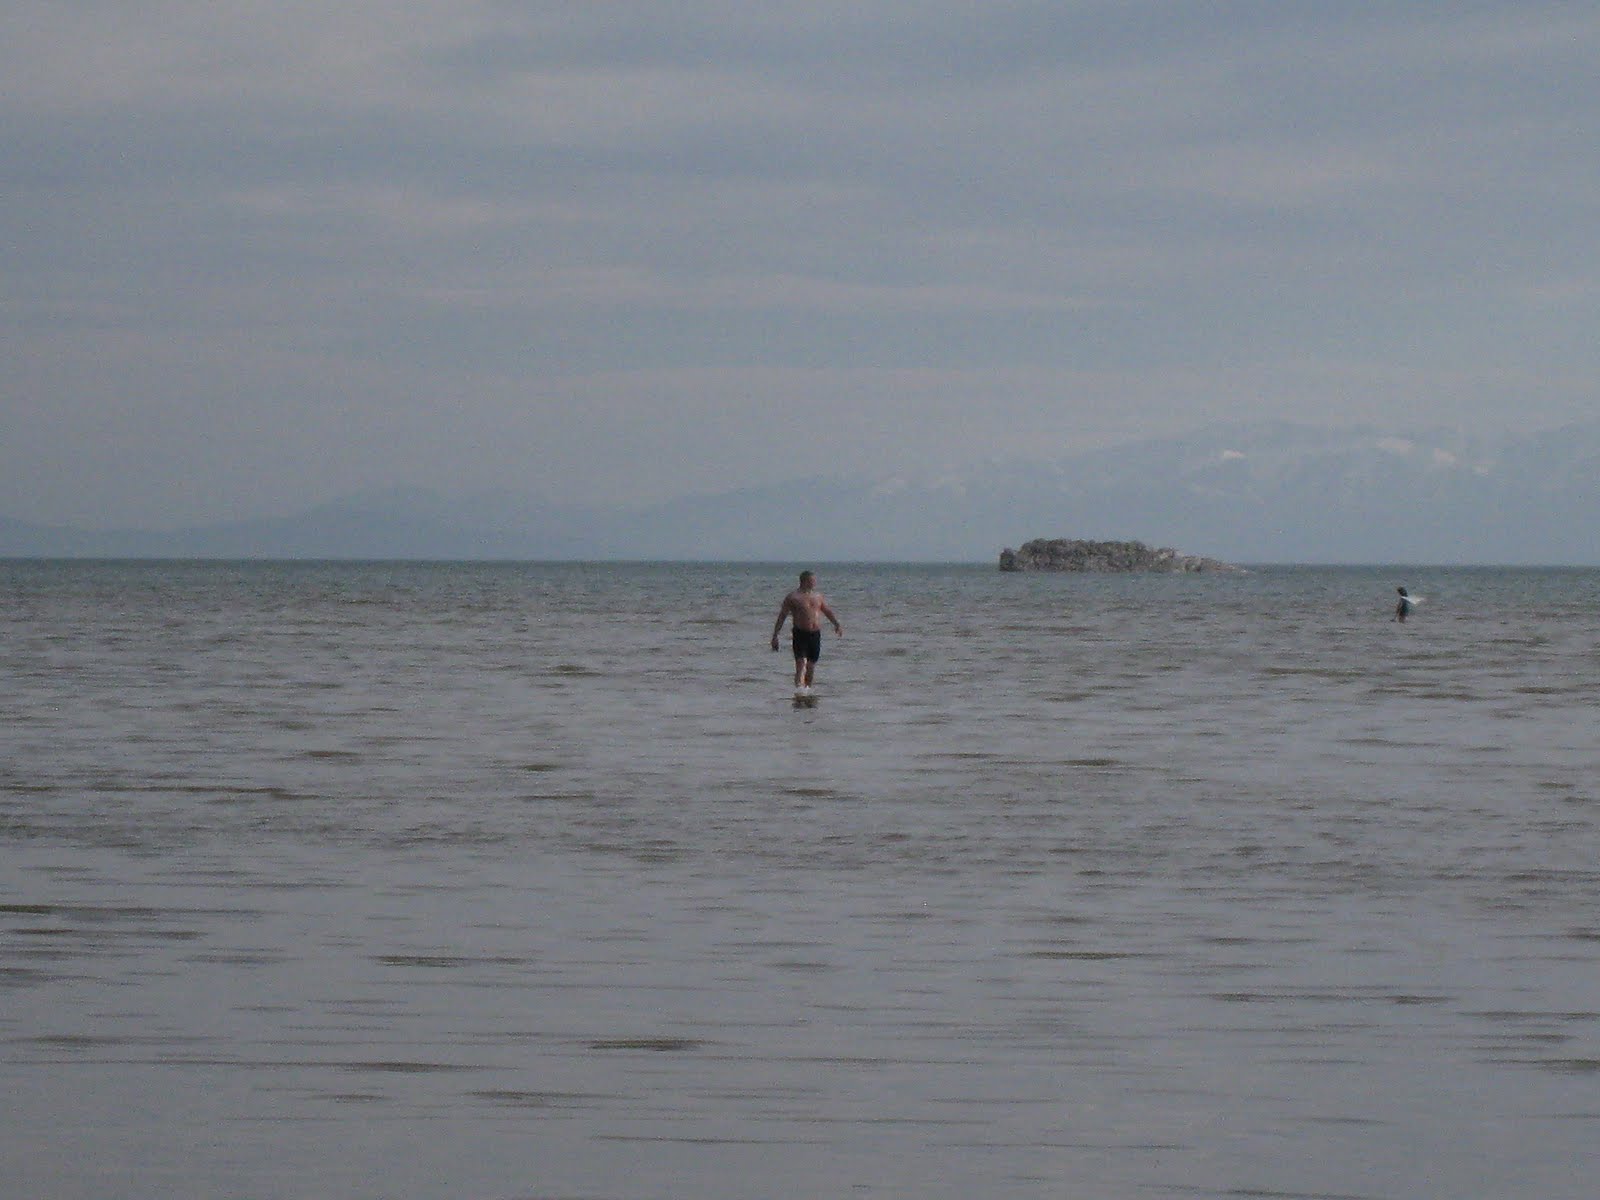 Gords Swim Log: Results of the Great Salt Lake Open Water 